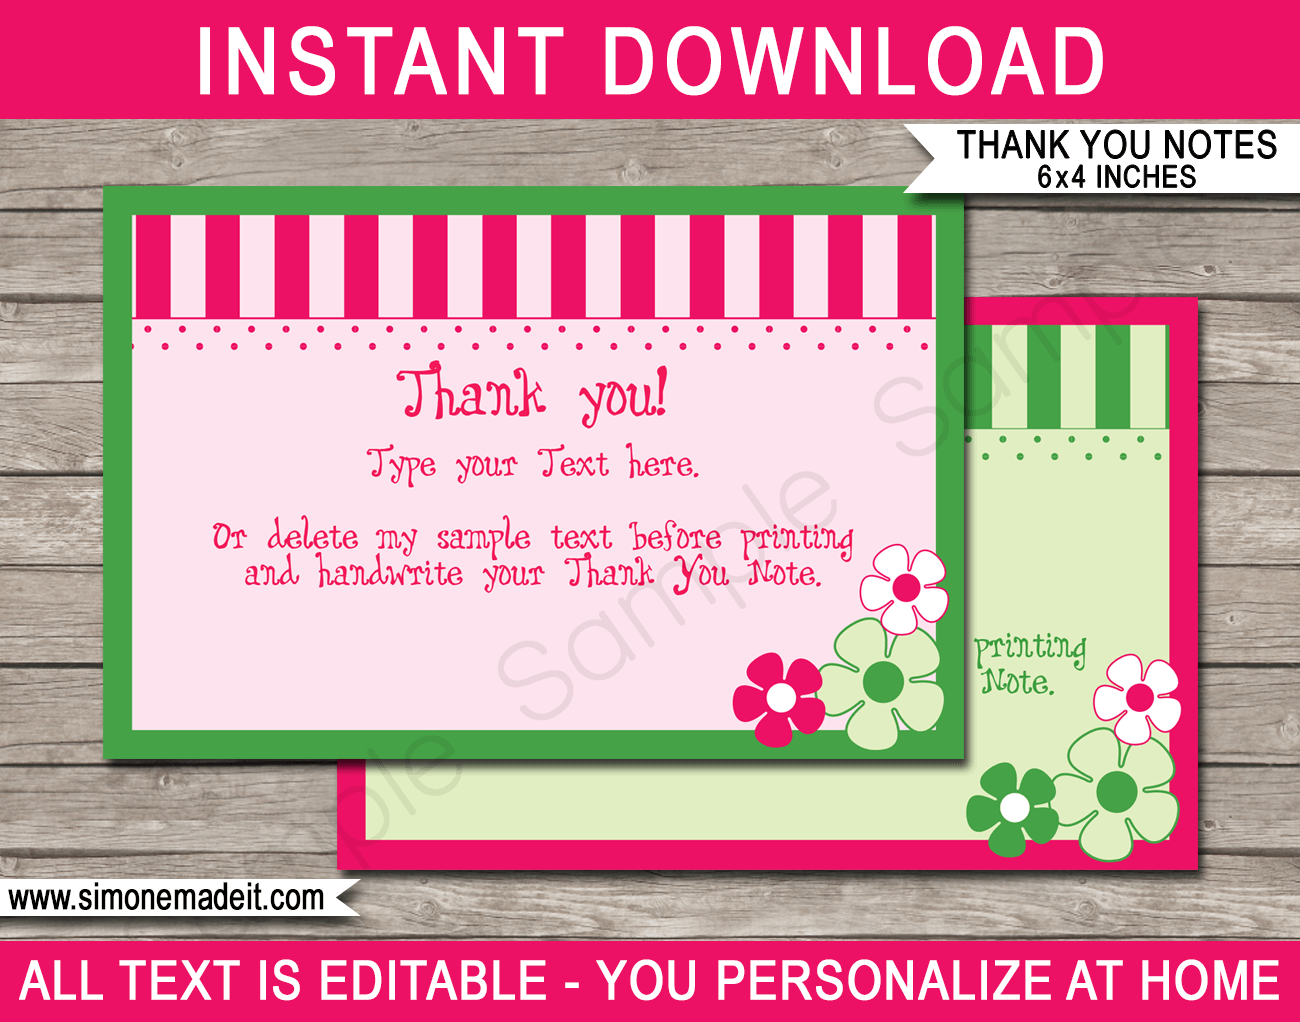 Printable Strawberry Shortcake Birthday Party Thank You Card Template - Favor Note Tags - Editable Text - Instant Download via simonemadeit.com